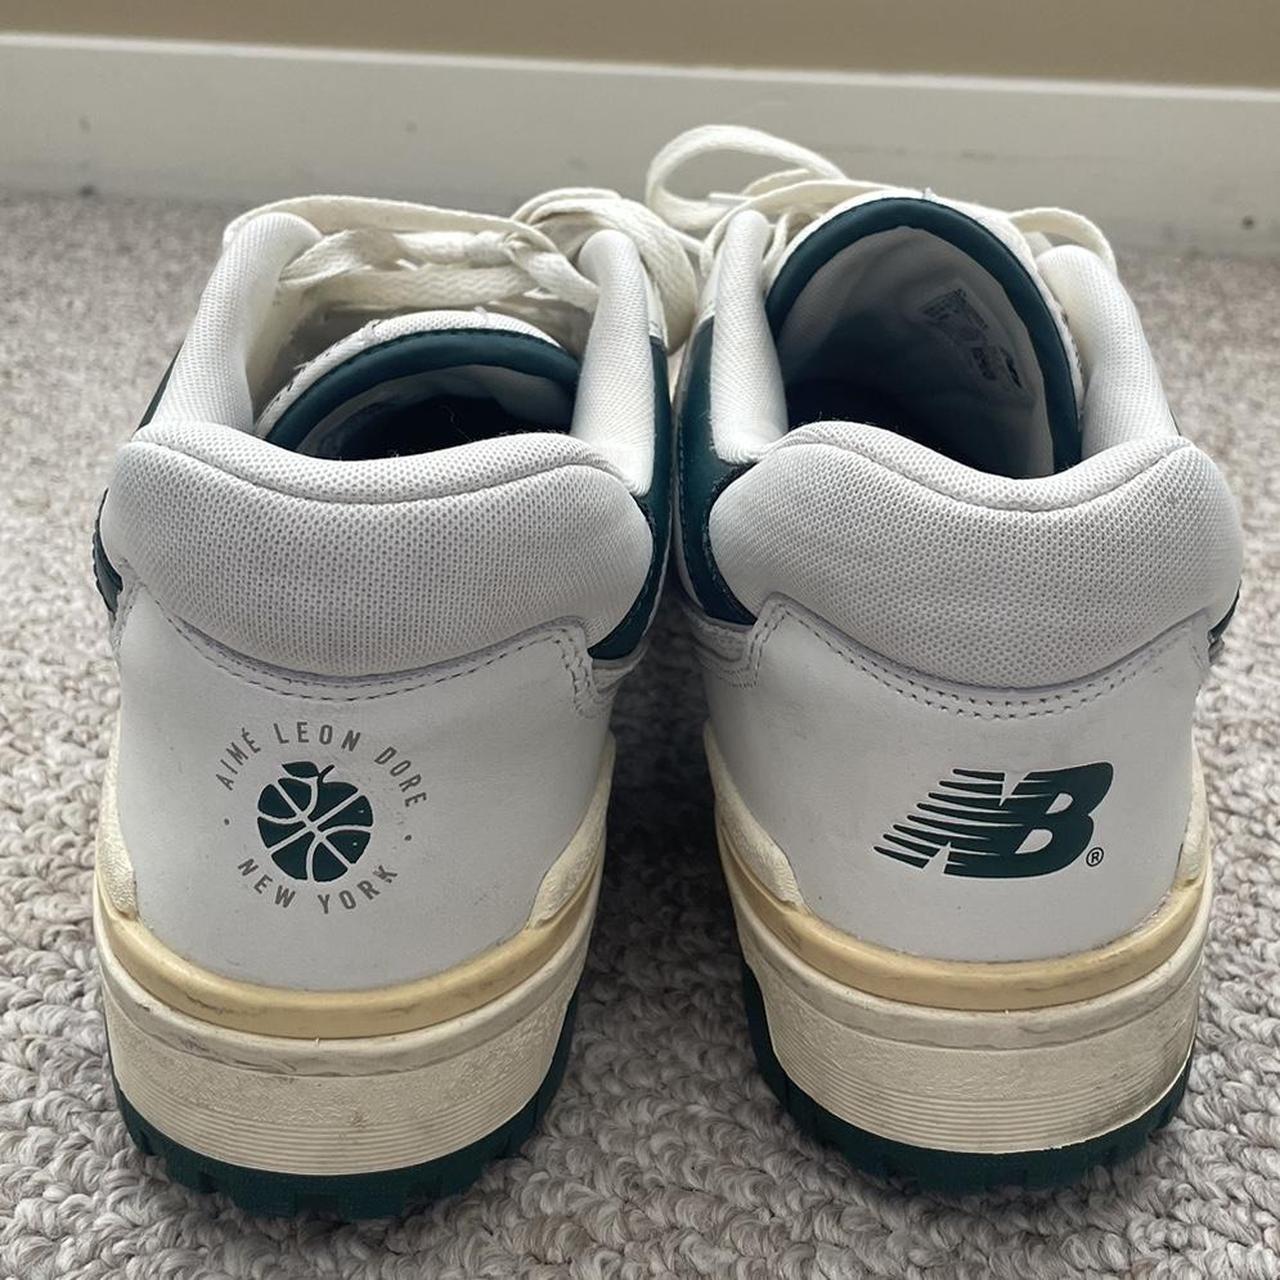 New Balance Men's White and Green Trainers | Depop